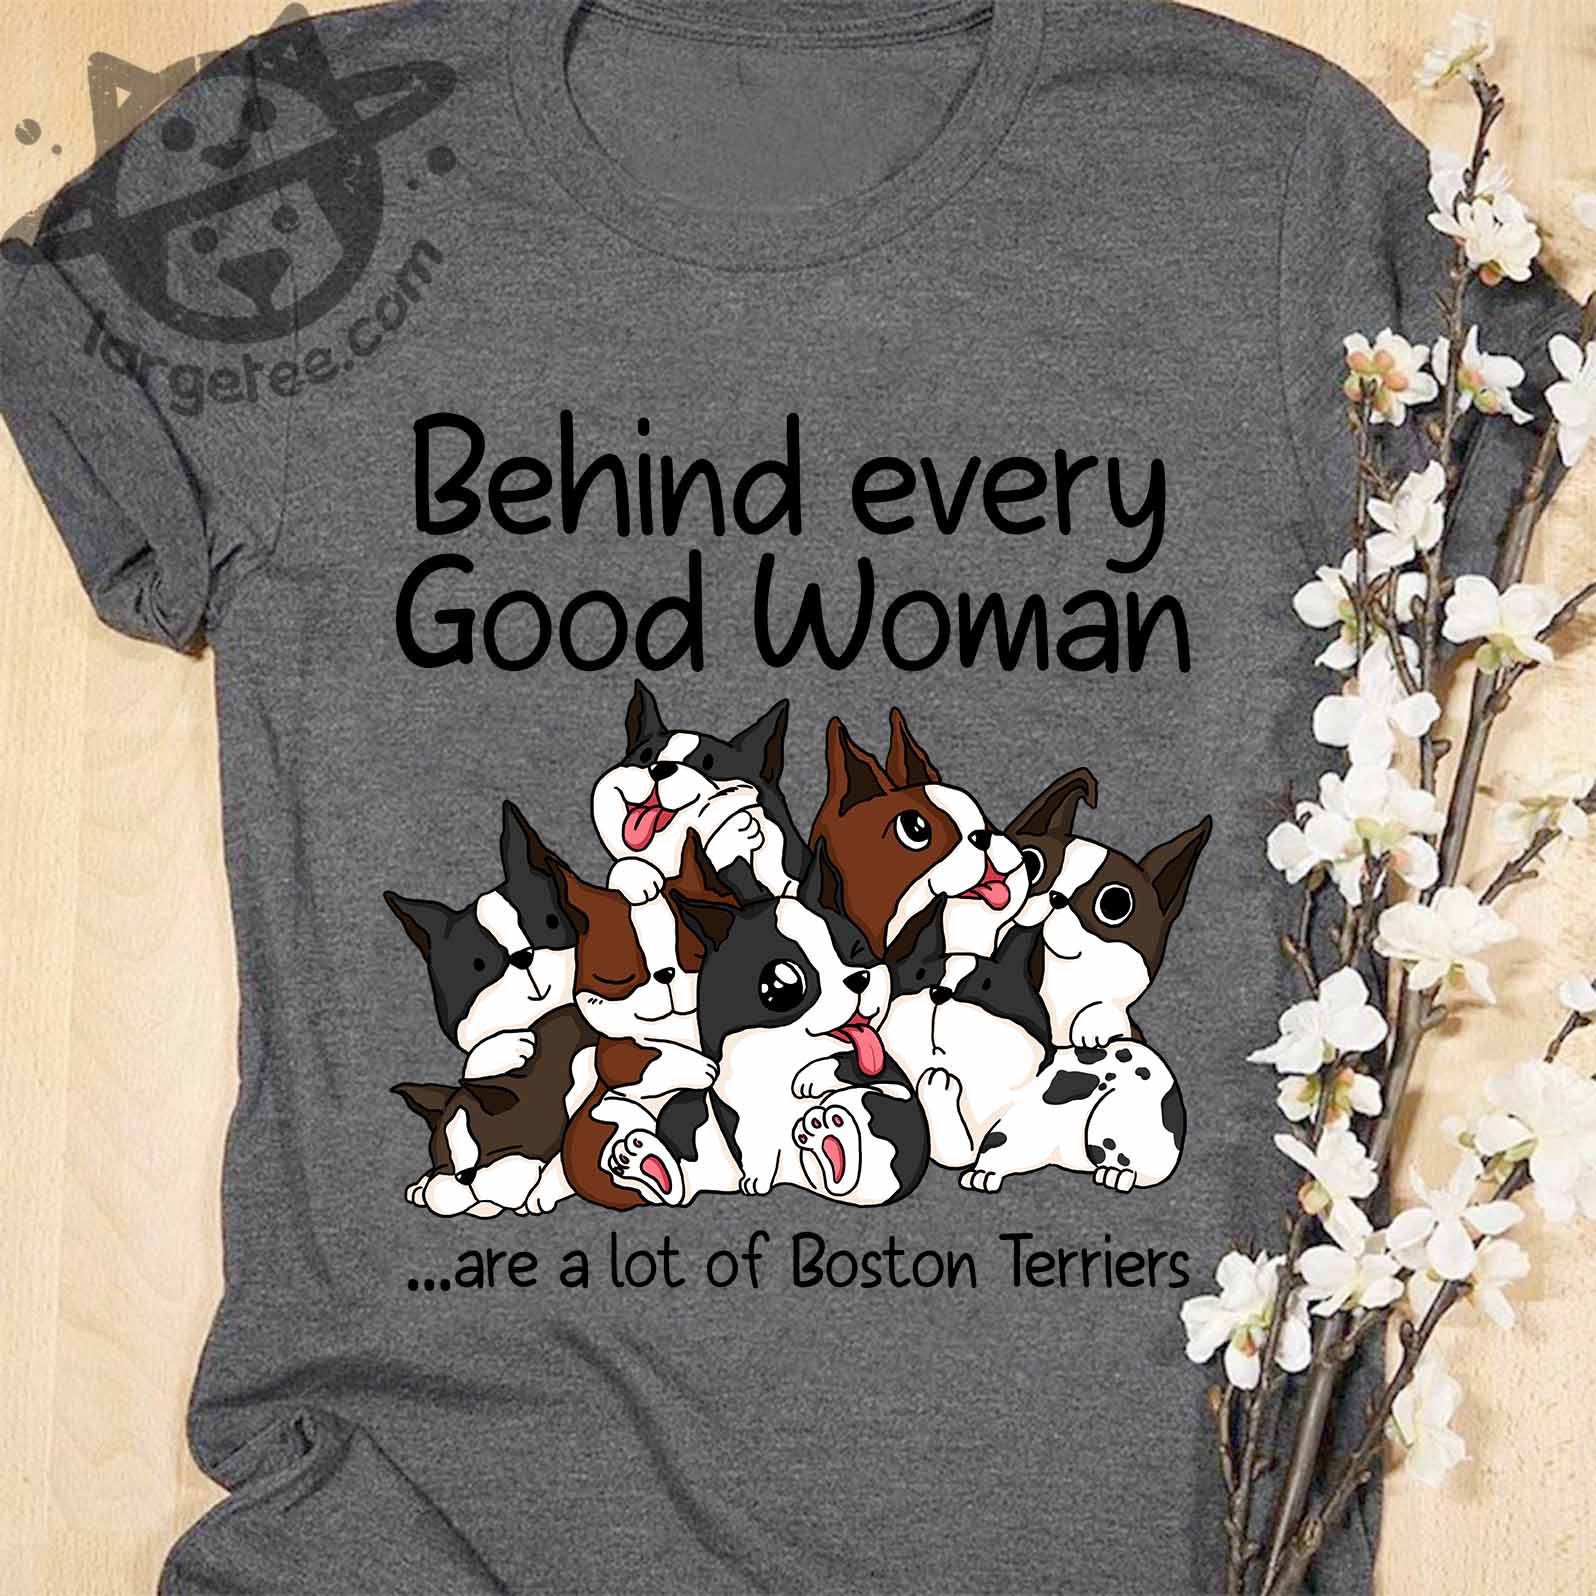 Behind every good woman are a lot of Boston Terriers